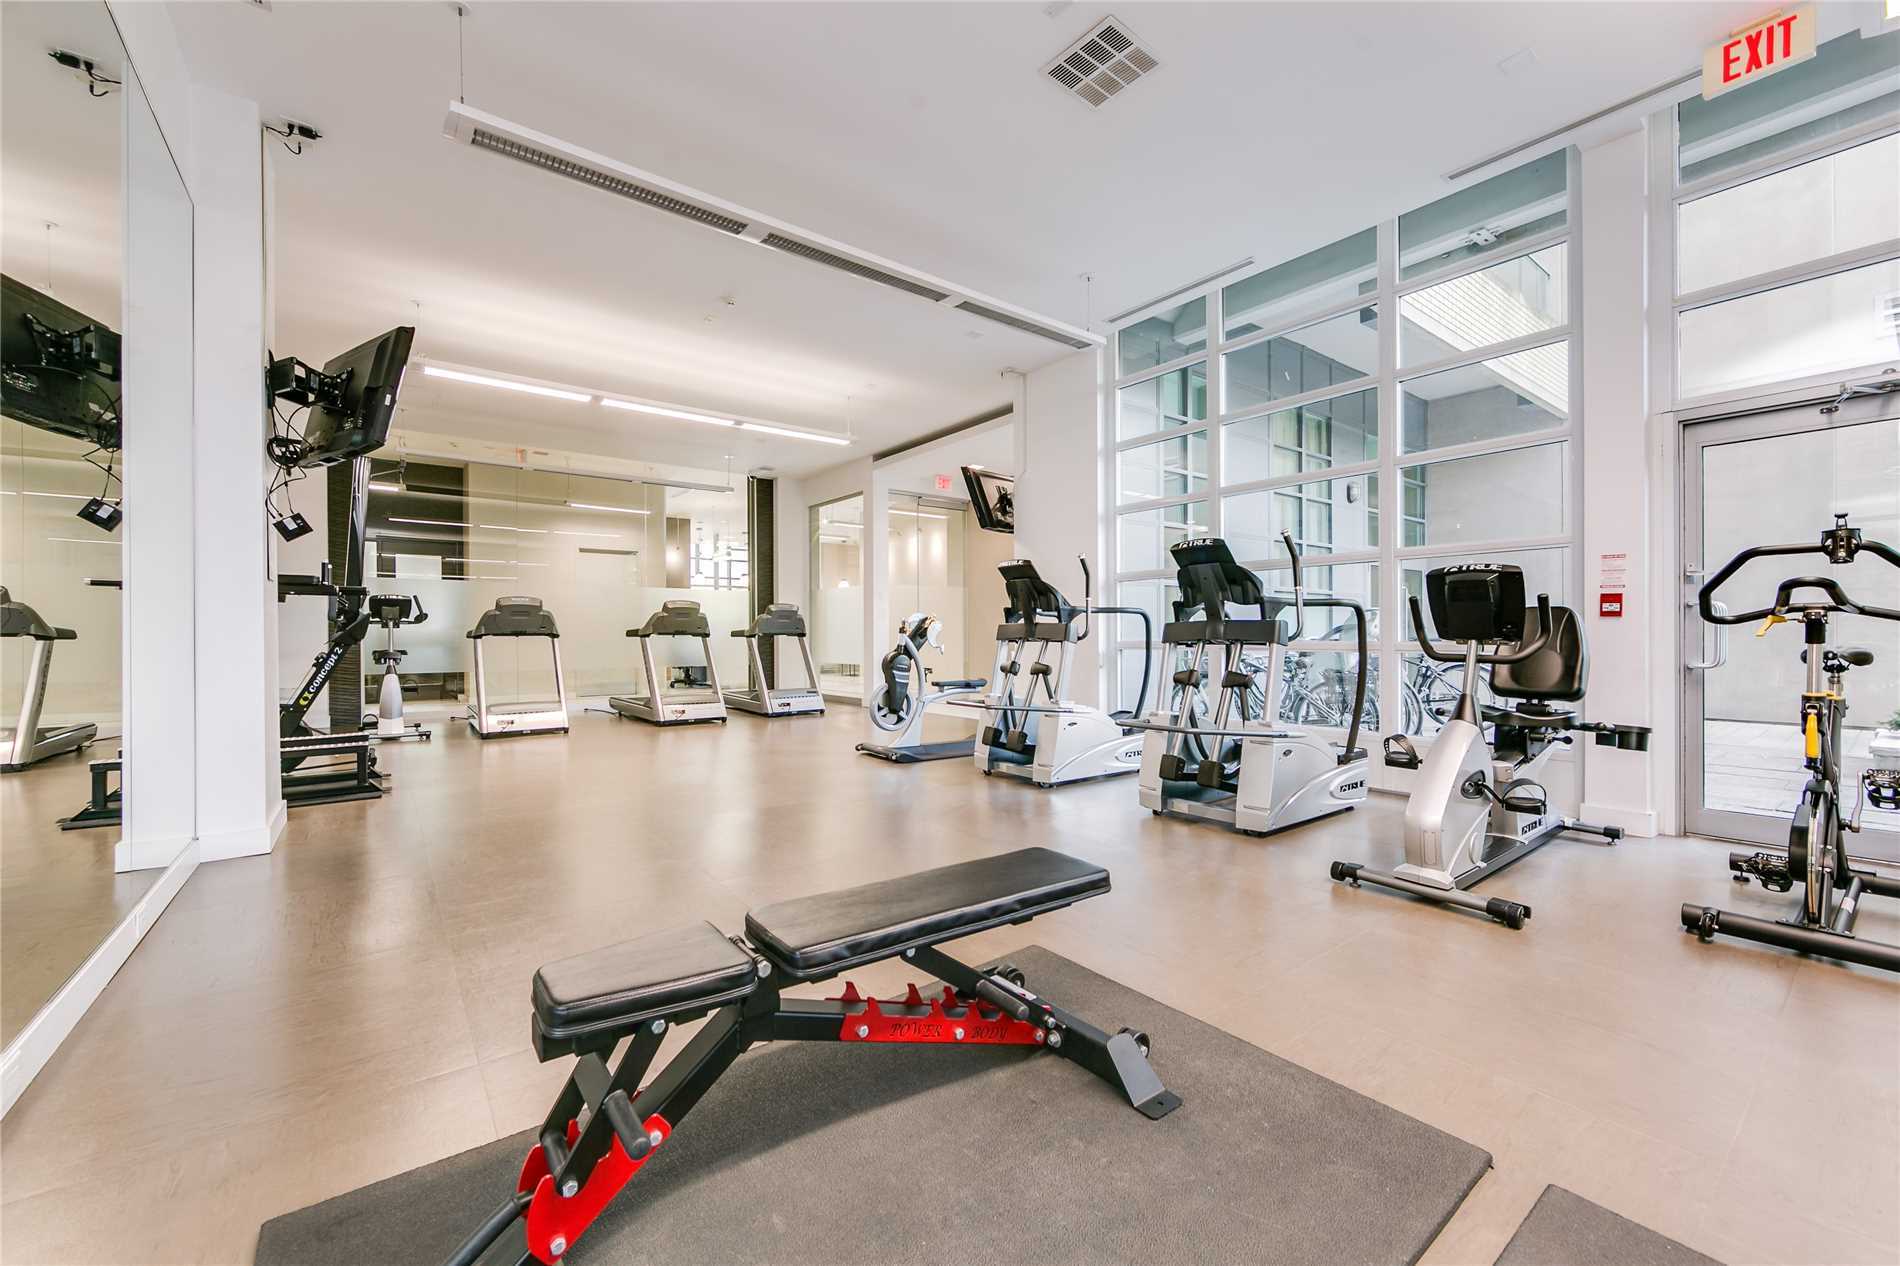 Gym with treadmills and exercise bike at Madison Avenue Lofts.